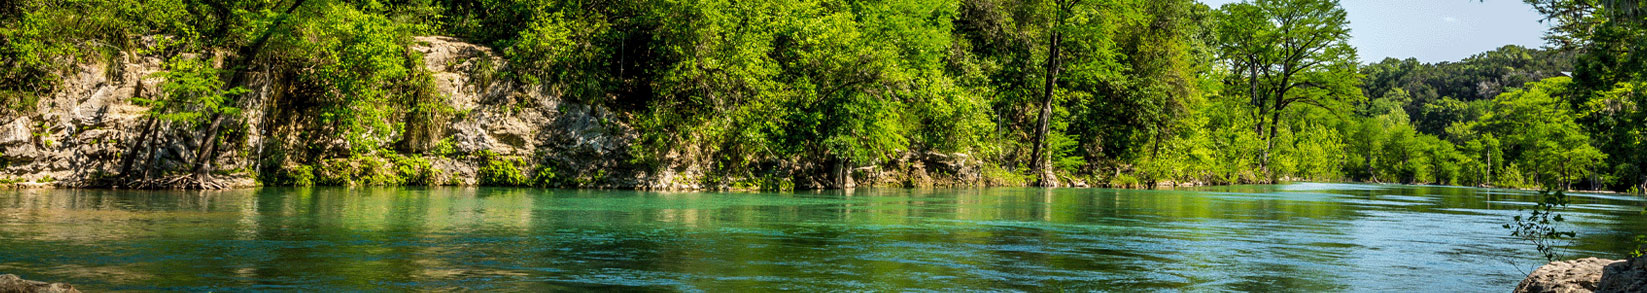 The Frio River in Garner State Park - Concan, Texas